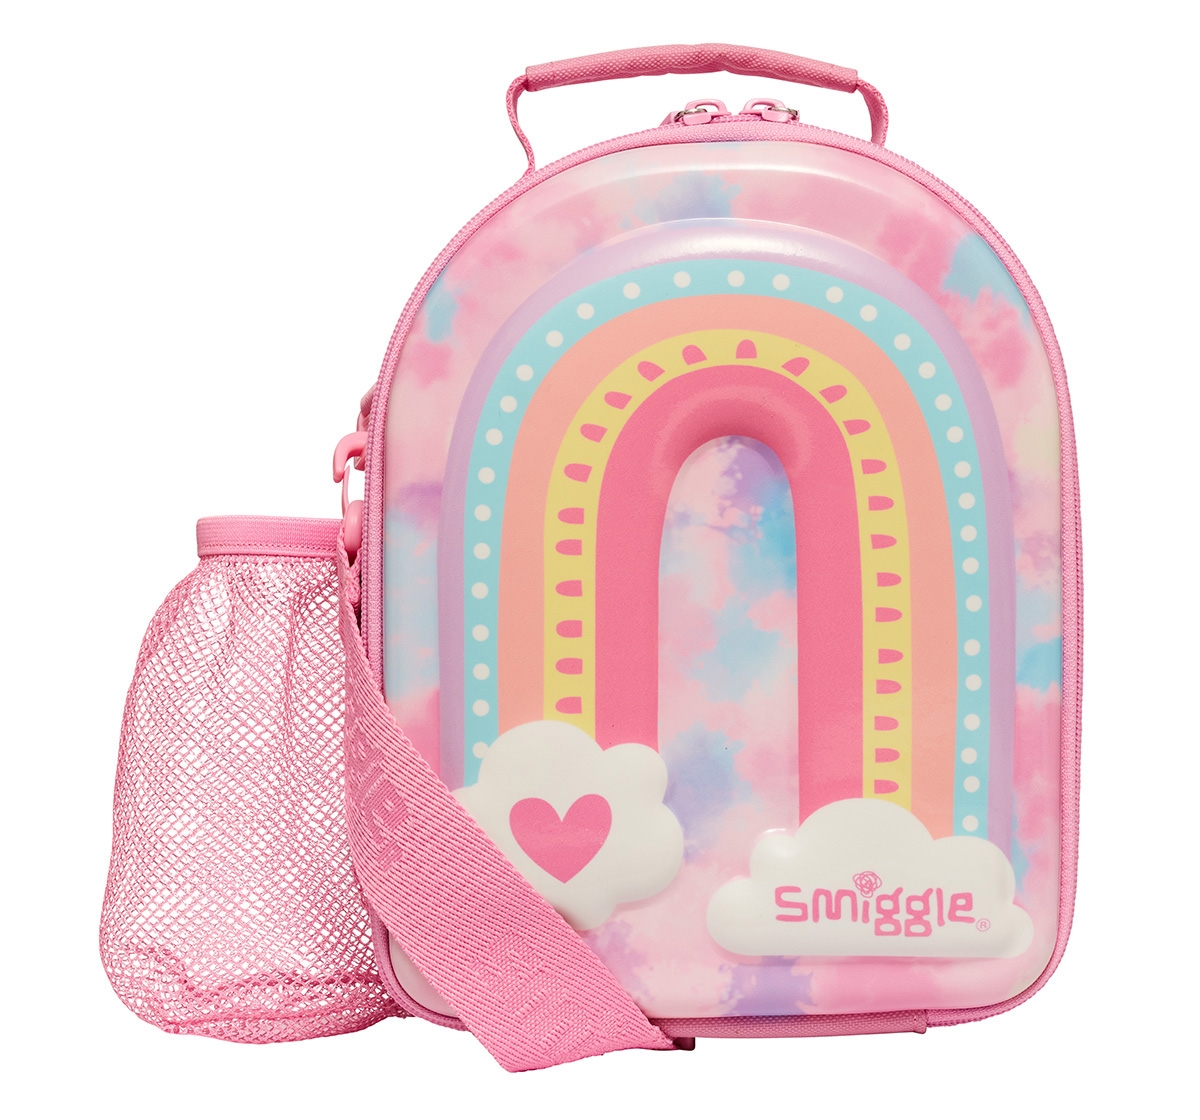 Smiggle | Smiggle Bright Side Hardtop Curve Lunch Box With Strap for Kids 3Y+, Pink